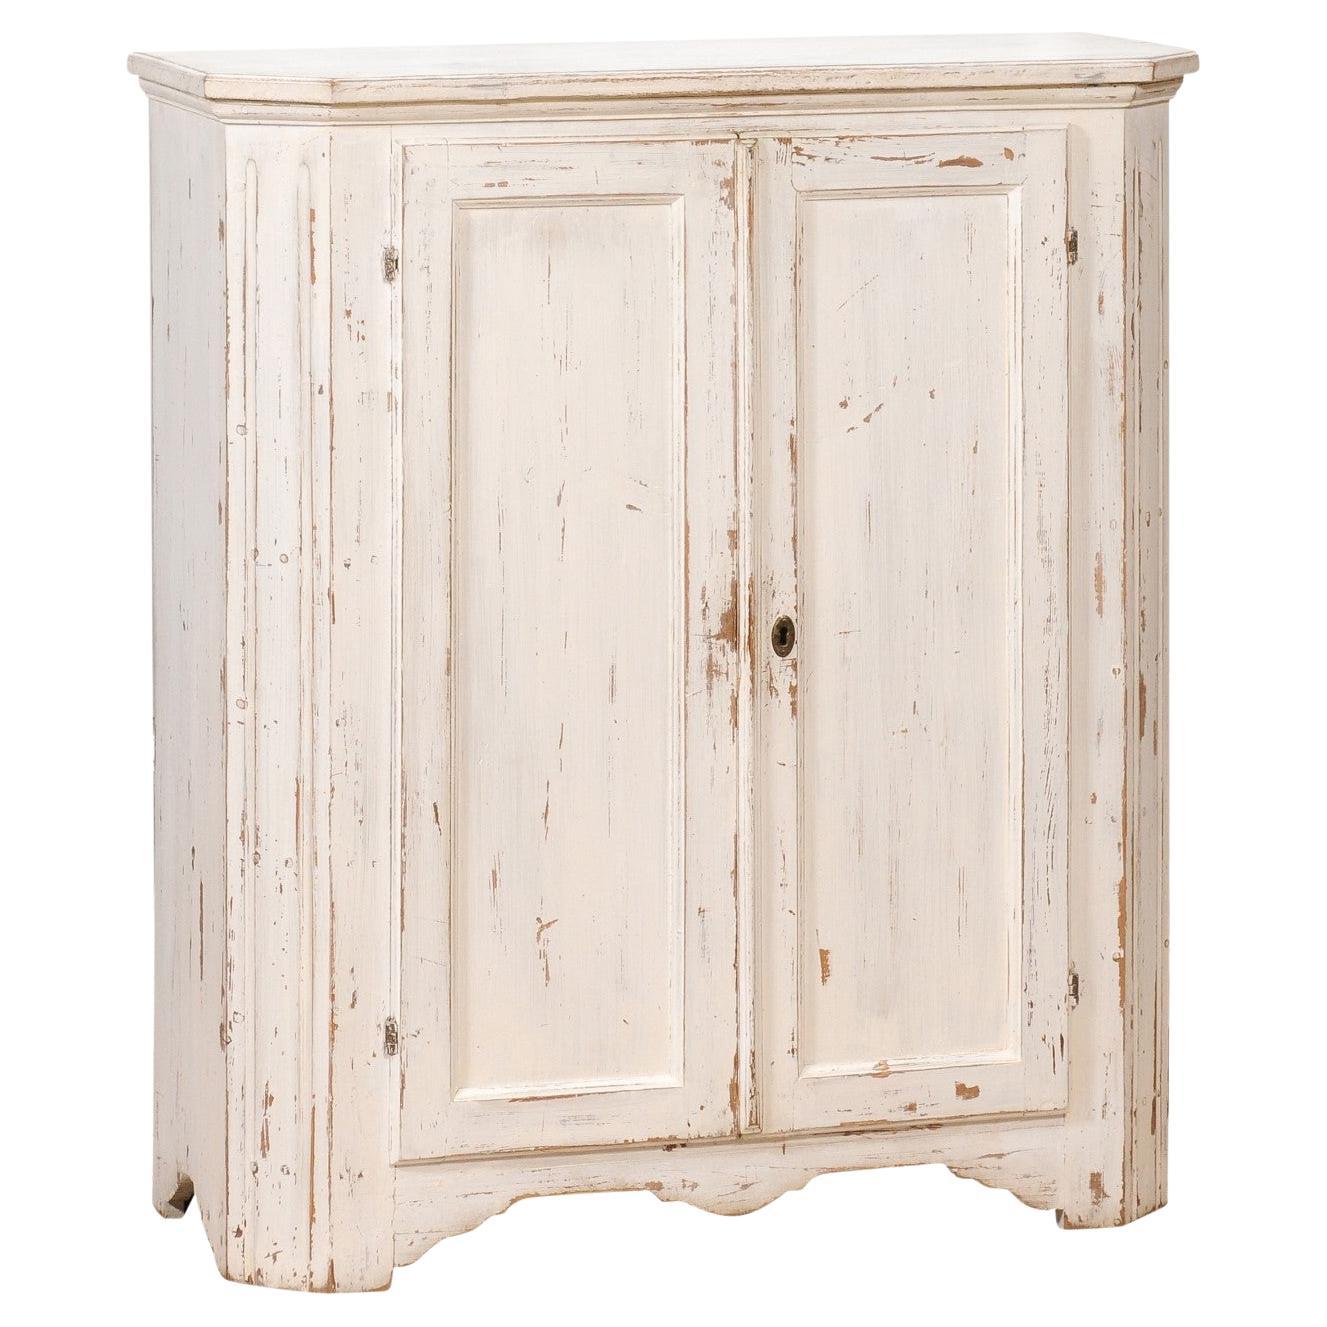 1830s Swedish Off-White Painted Wood Narrow Sideboard with Distressed Finish For Sale